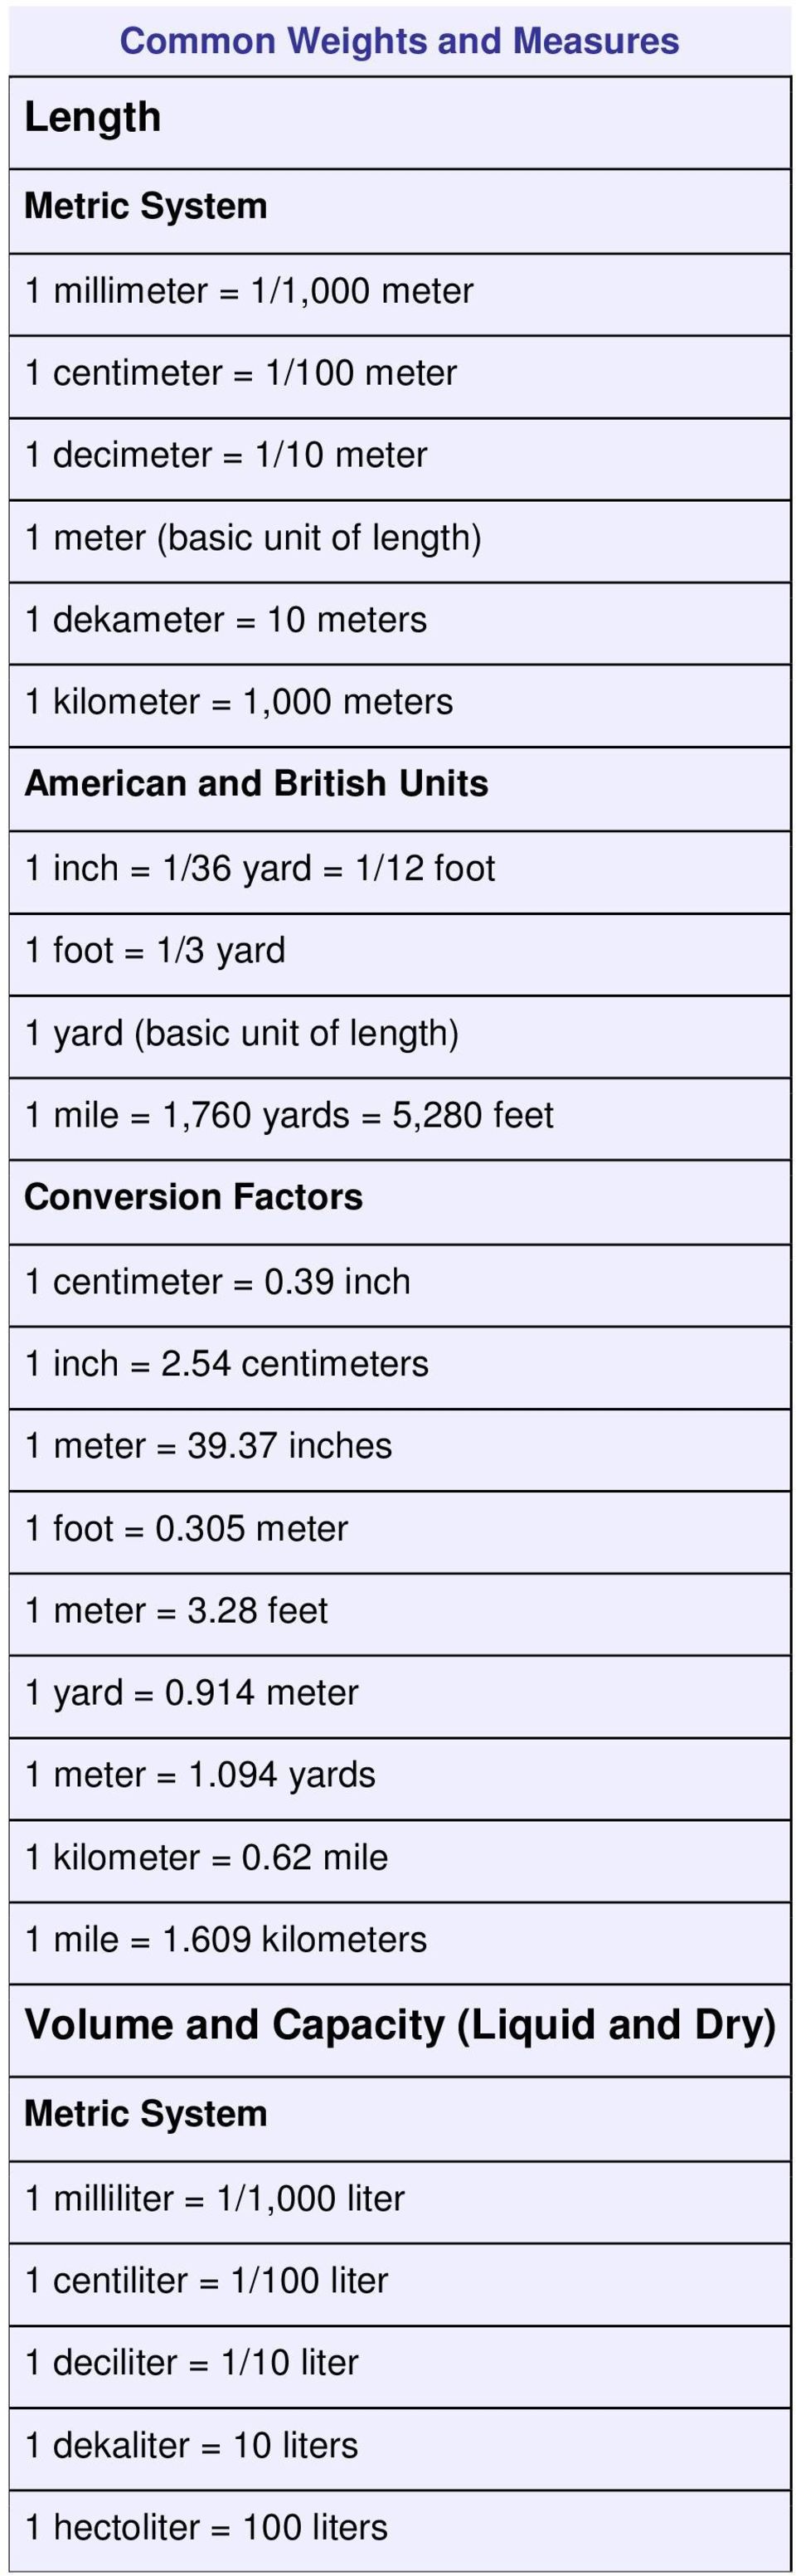 centimeter = 0.39 inch 1 inch = 2.54 centimeters 1 meter = 39.37 inches 1 foot = 0.305 meter 1 meter = 3.28 feet 1 yard = 0.914 meter 1 meter = 1.094 yards 1 kilometer = 0.